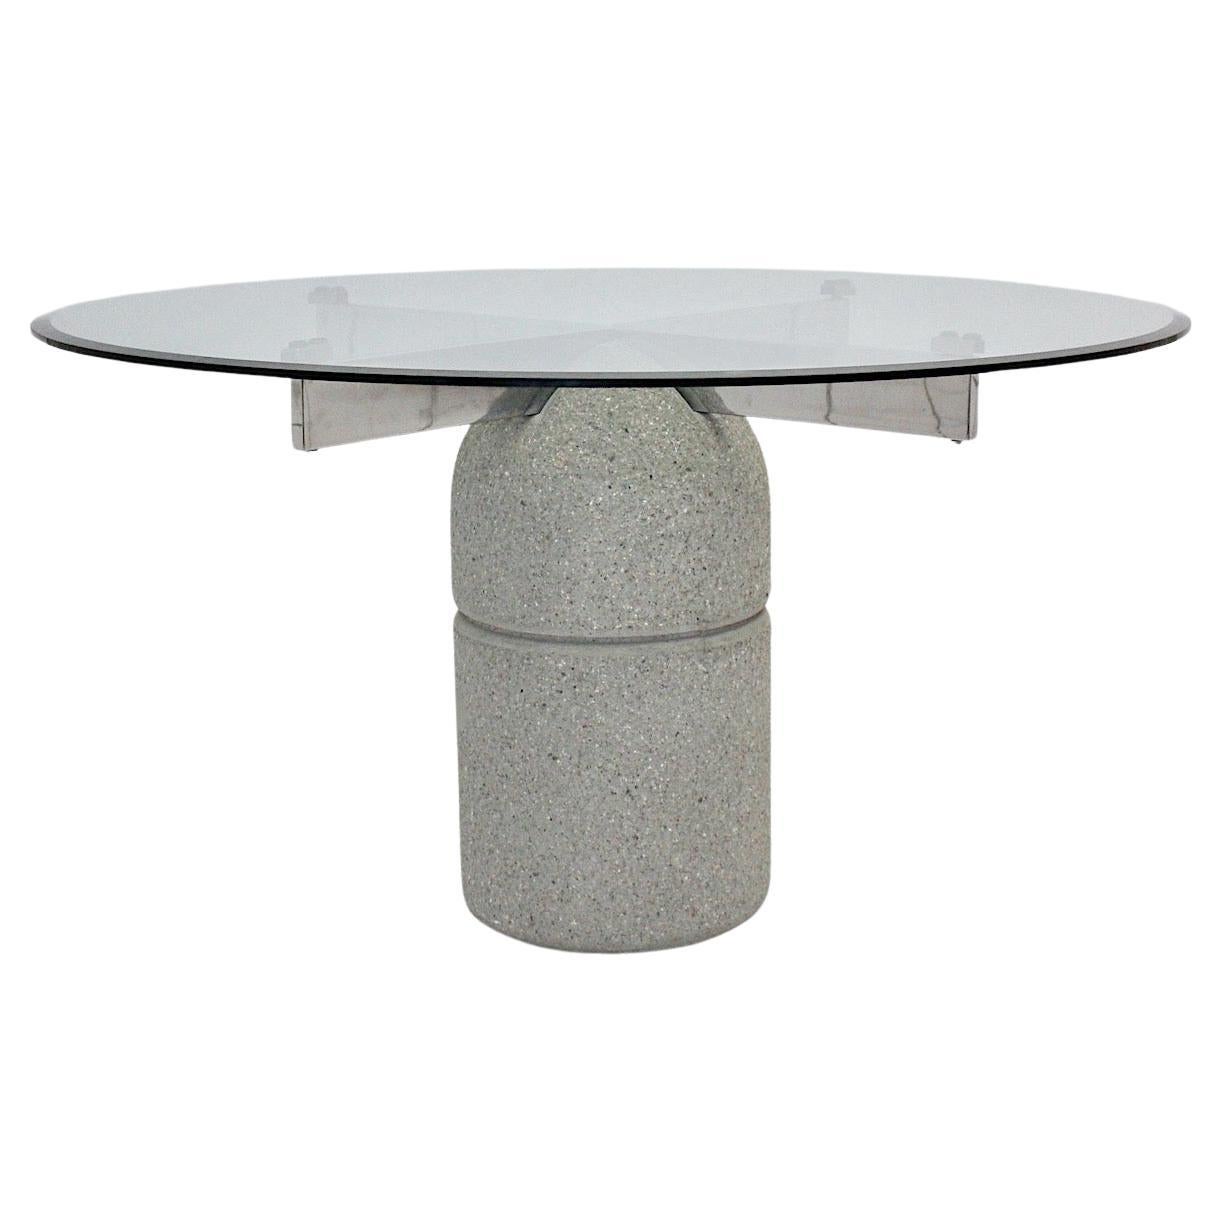 Modernist Vintage Stone Dining Table Giovanni Offredi for Saporiti 1973 Italy